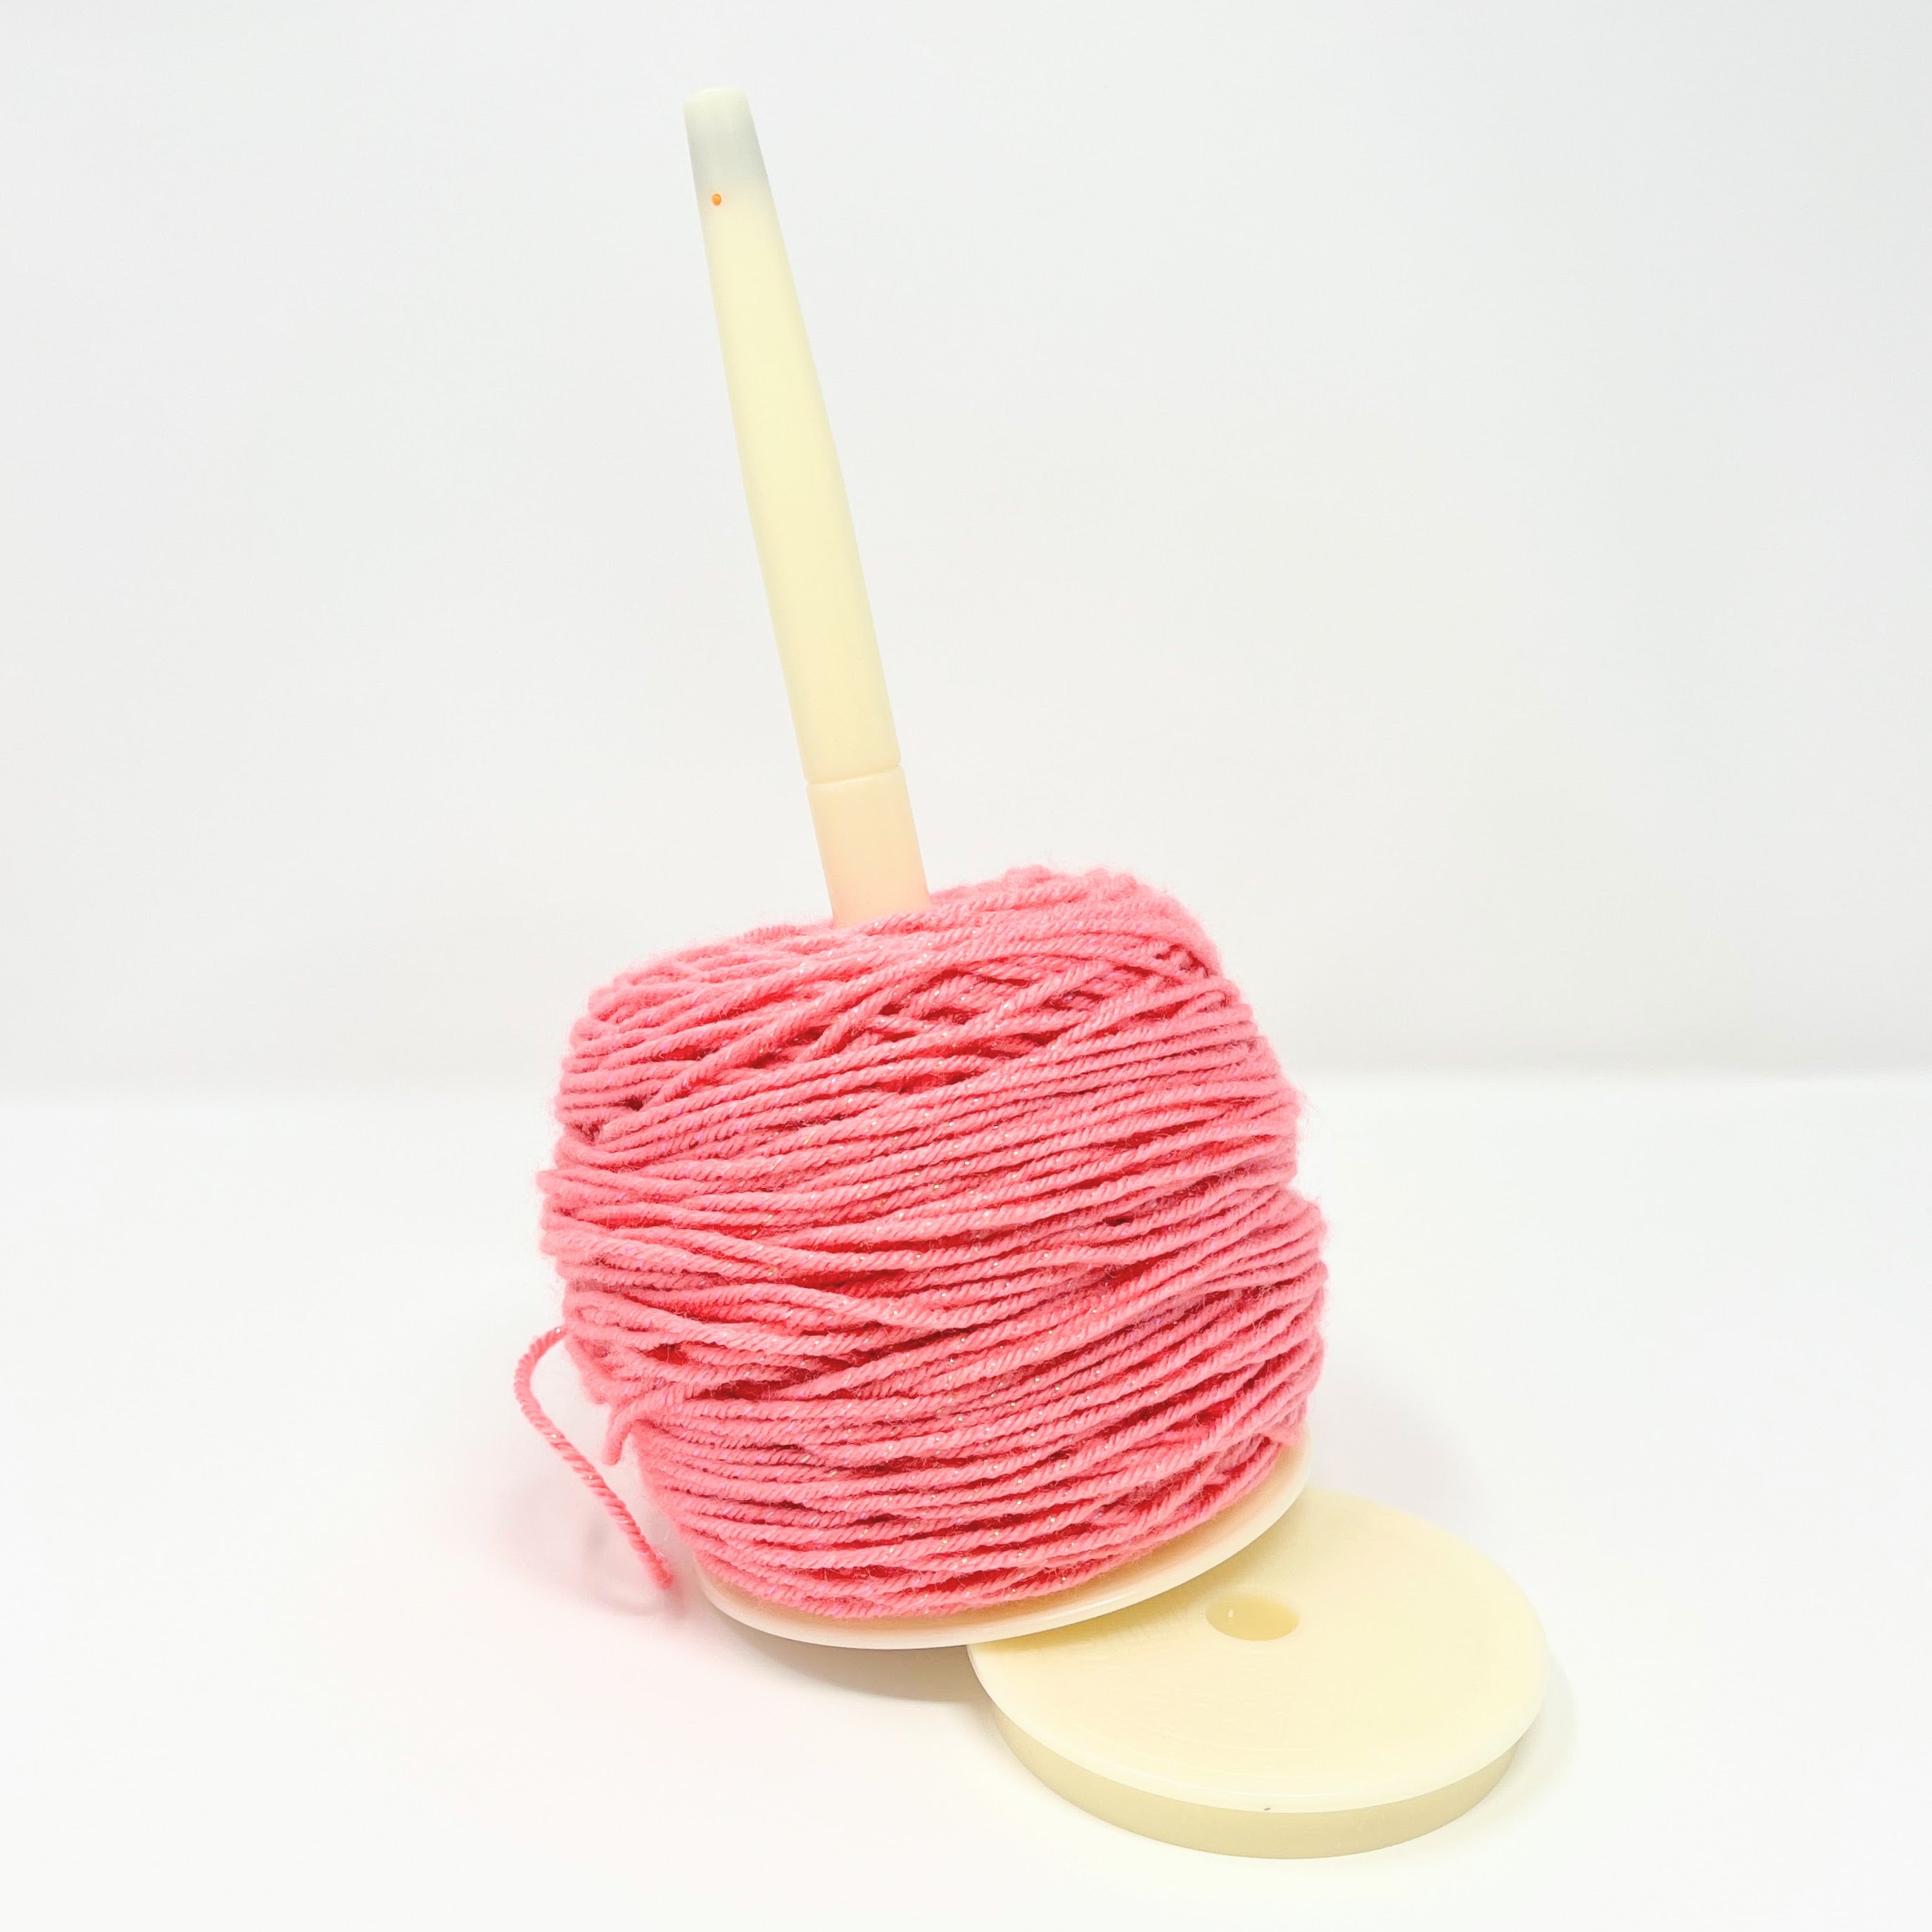 Wool Jeanie – Wool and Crafts – Buy yarn, wool, needles and other knitting  and crafting Supplies online with fast delivery